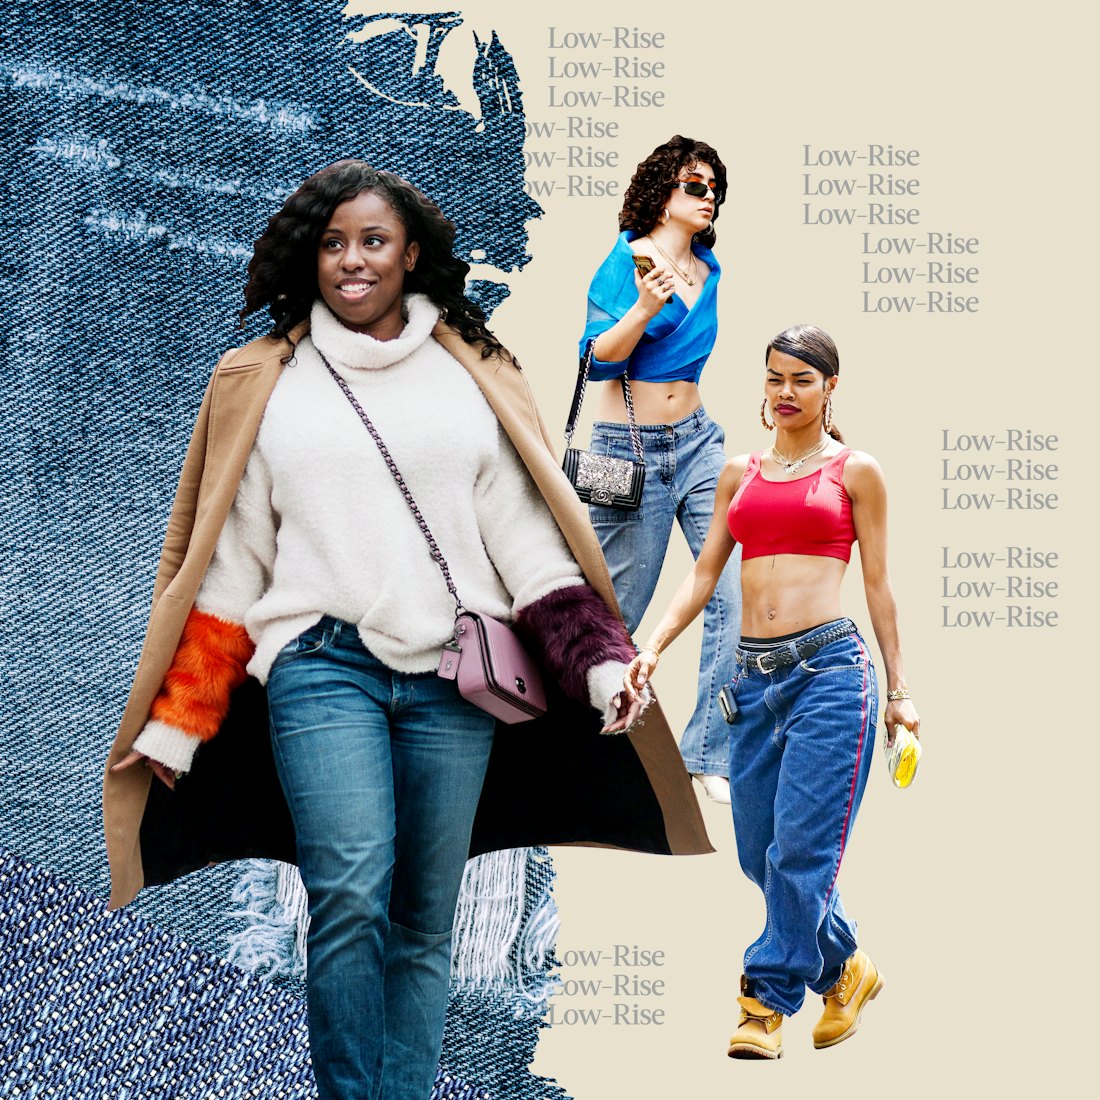 A collage of three women wearing low-rise jeans